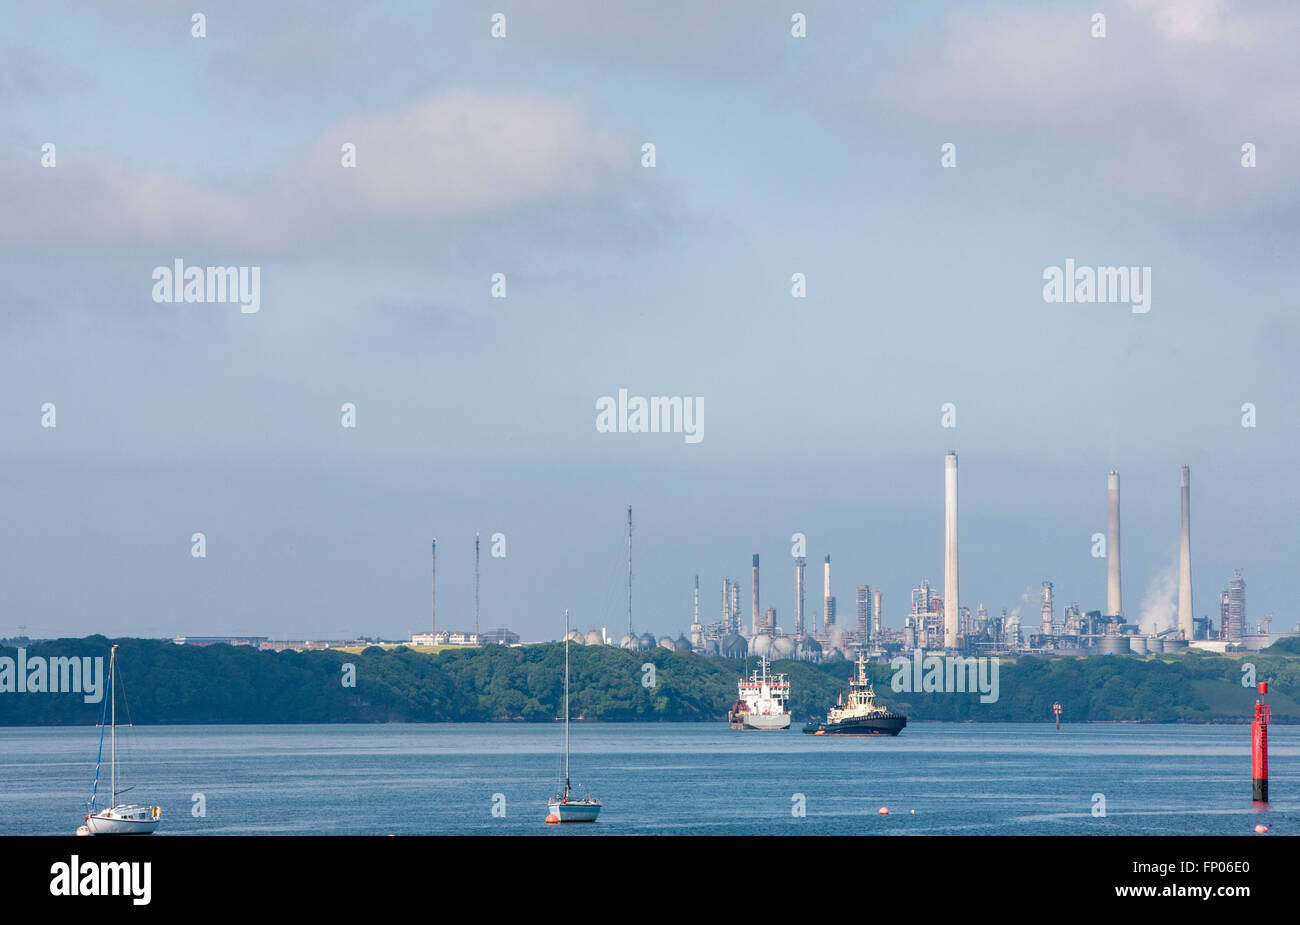 Oil refinery at Milford Haven,Pembrokeshire,Wales,U.K. Stock Photo